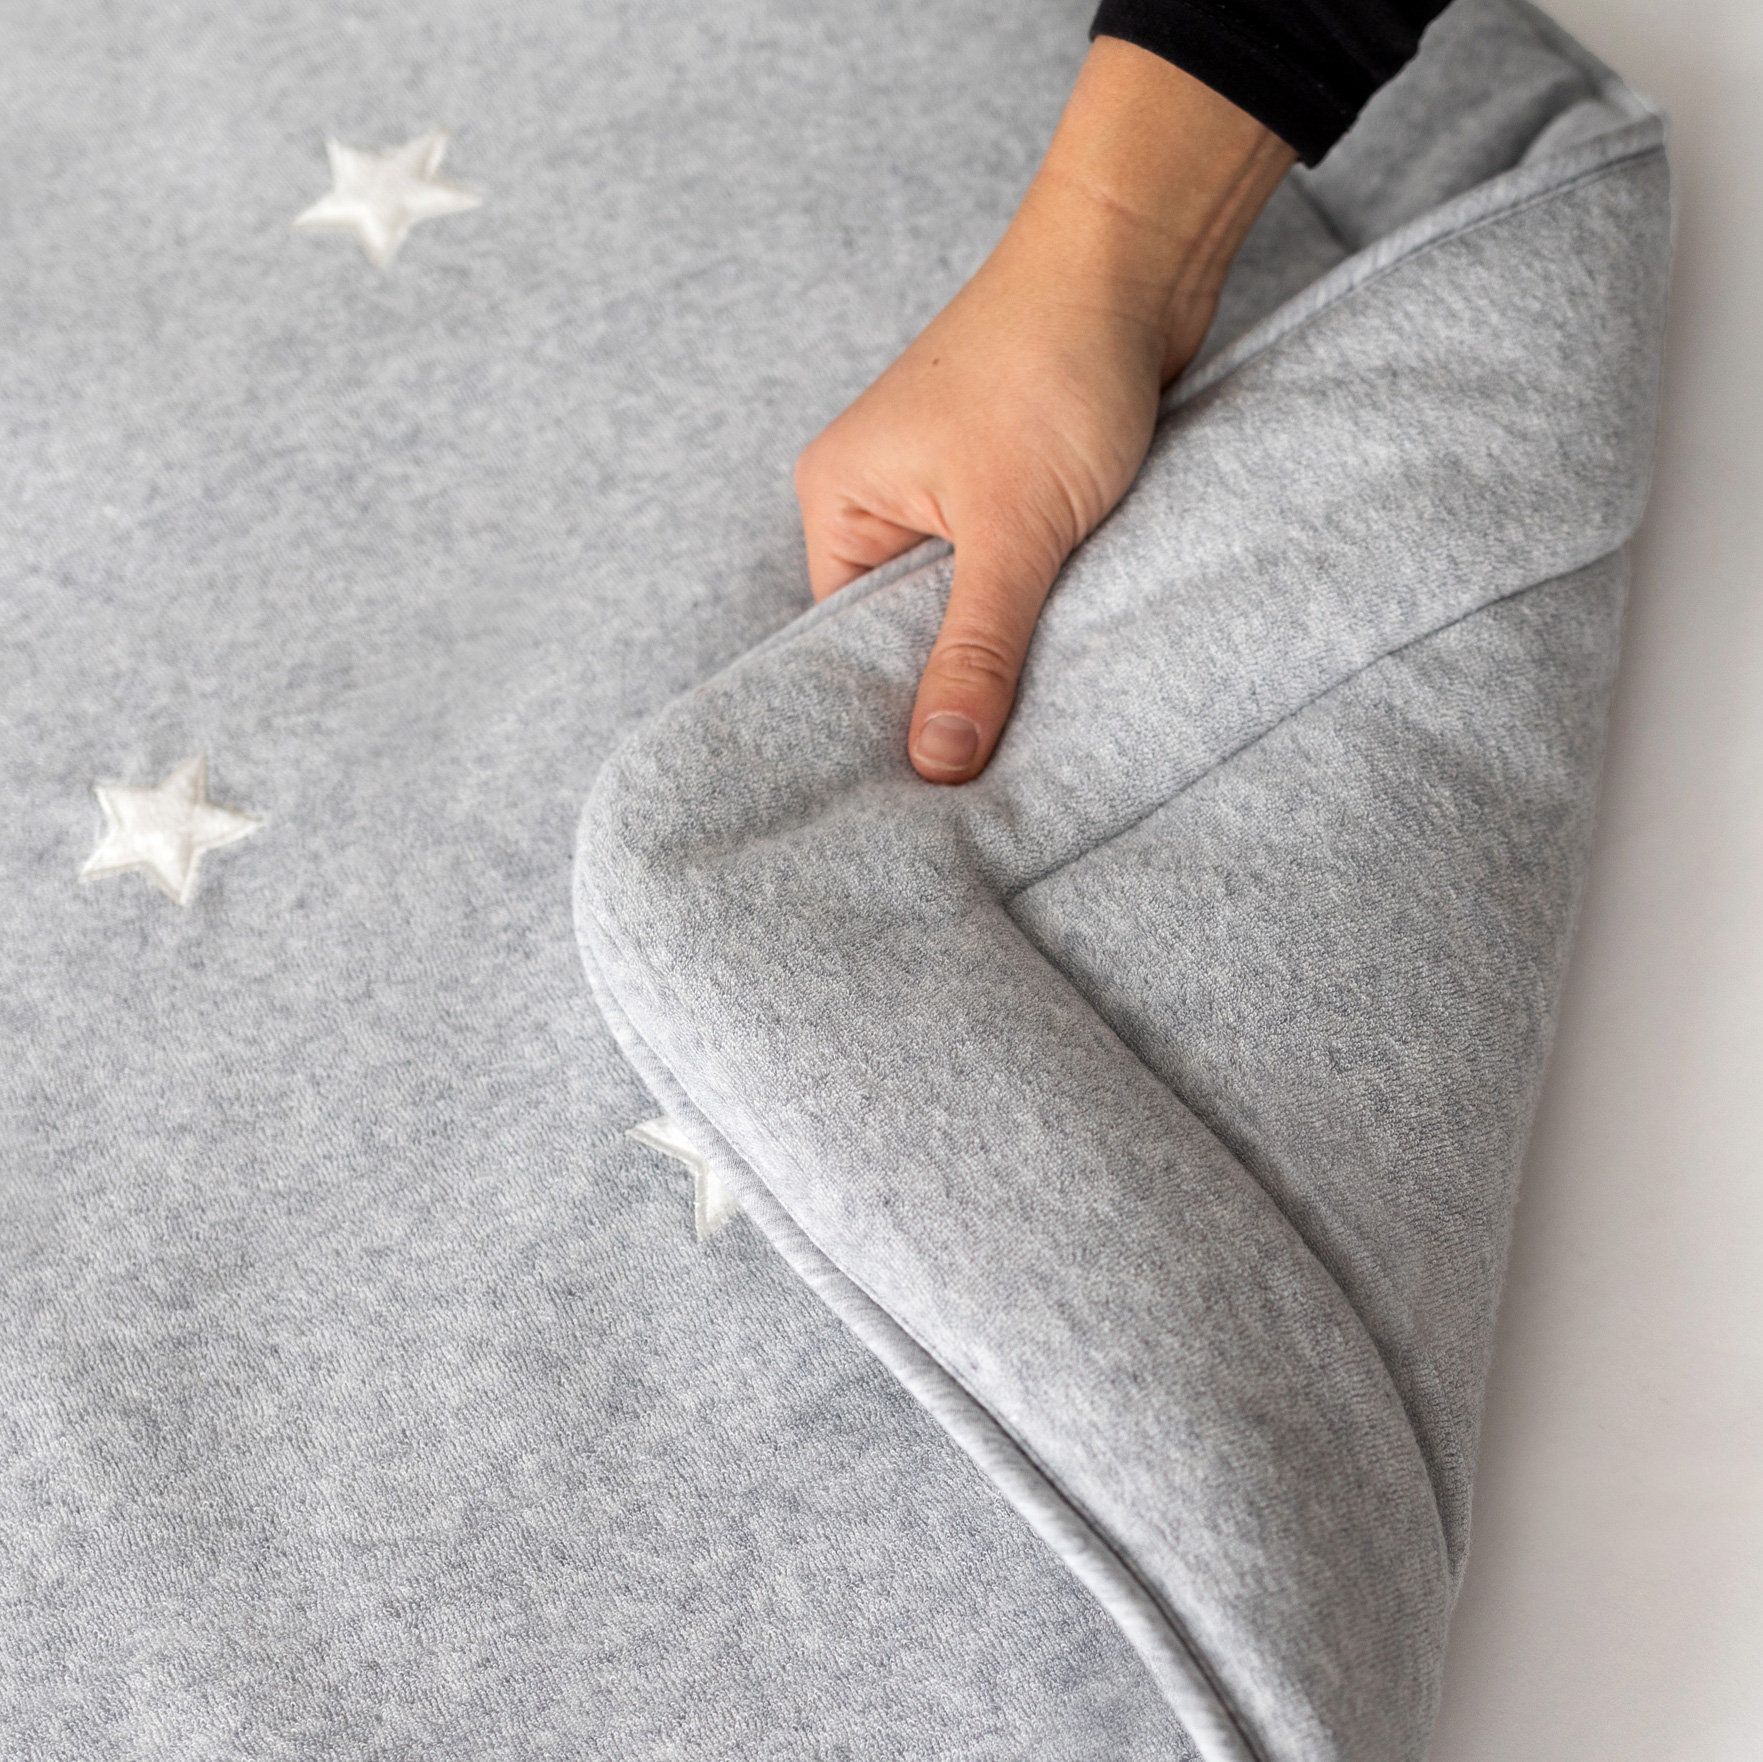 Padded play mat Pady terry + terry 75x95cm STARY Mix greyOutlet